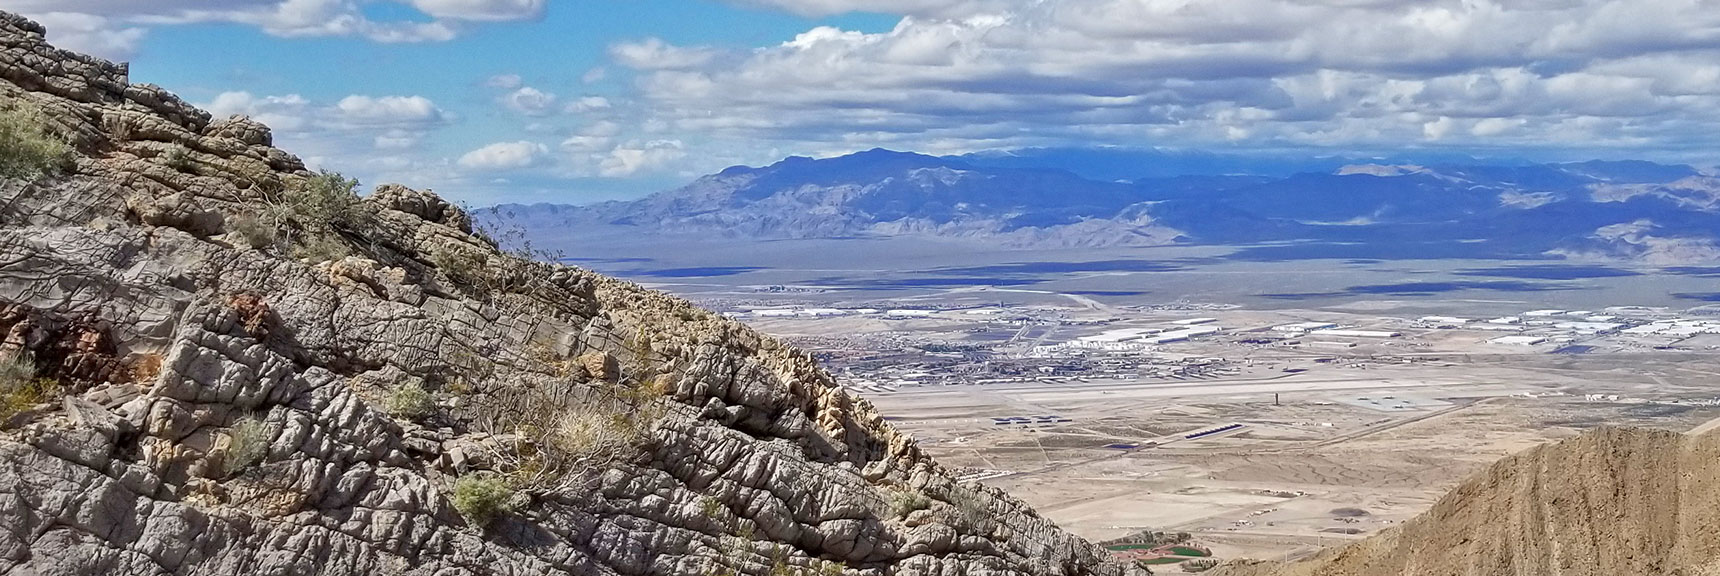 View of Gass Peak from Frenchman Mountain, Nevada